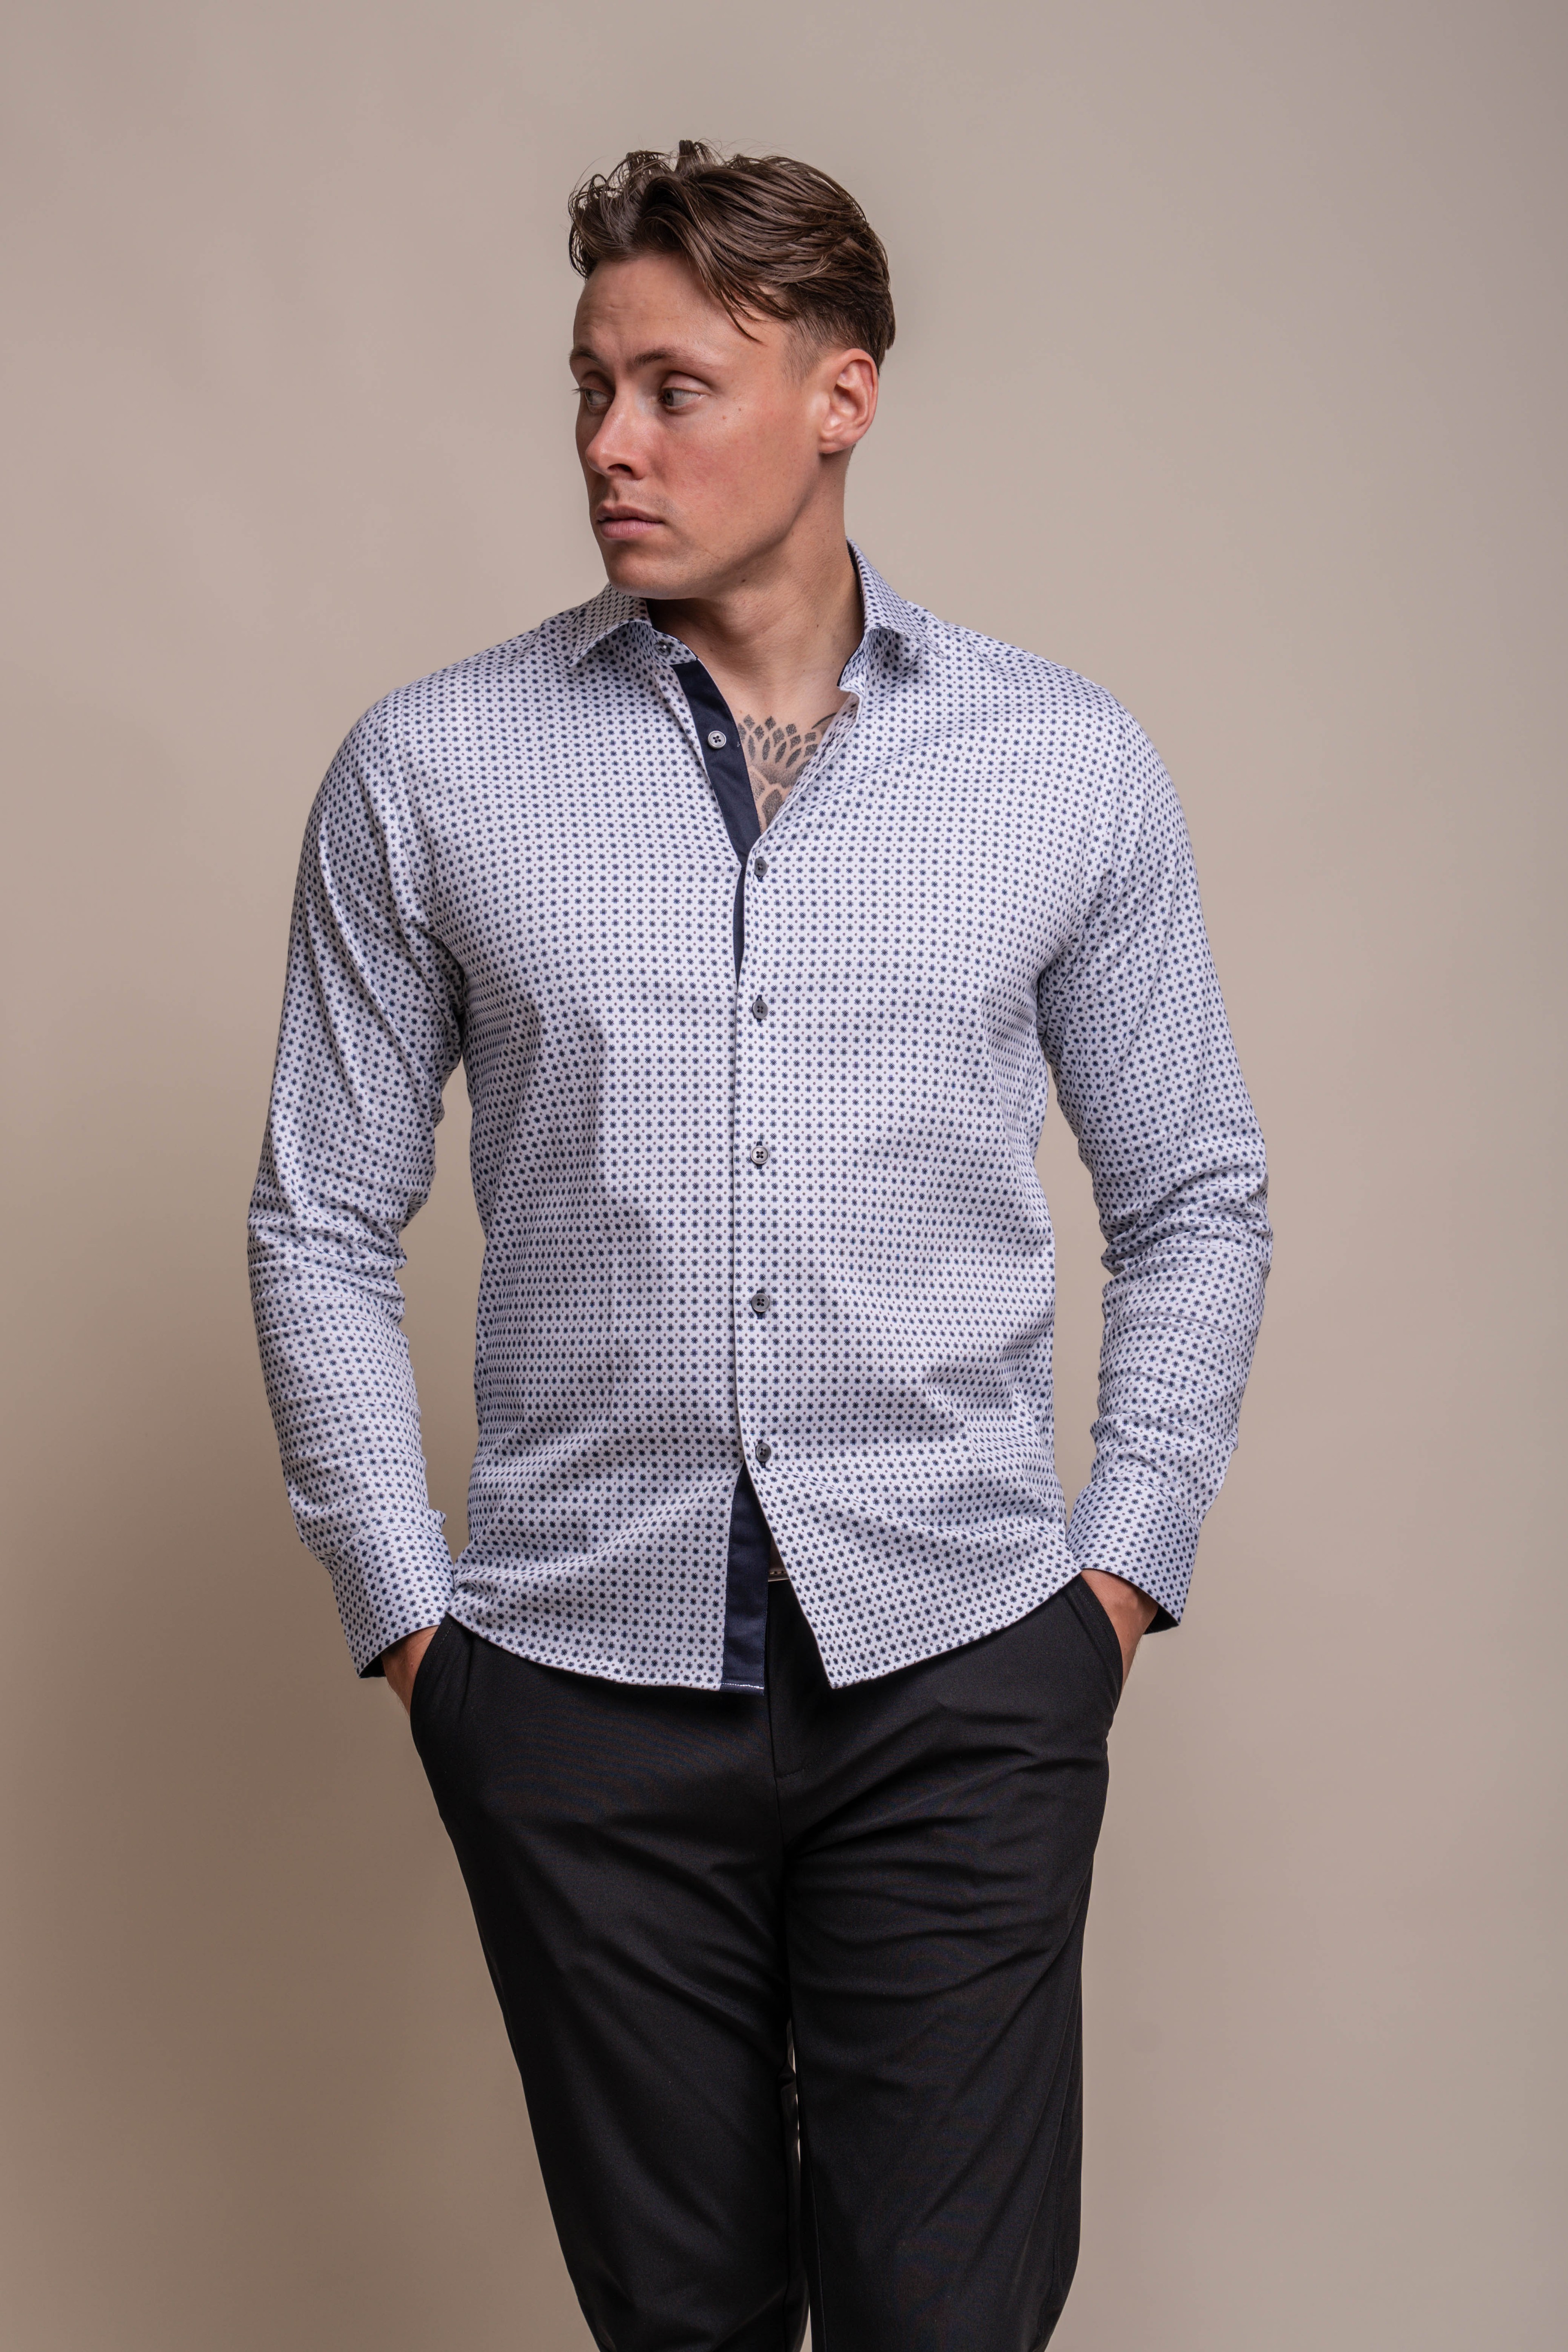 Men's Slim Fit Patterned Cotton Casual White Shirt - MANIA